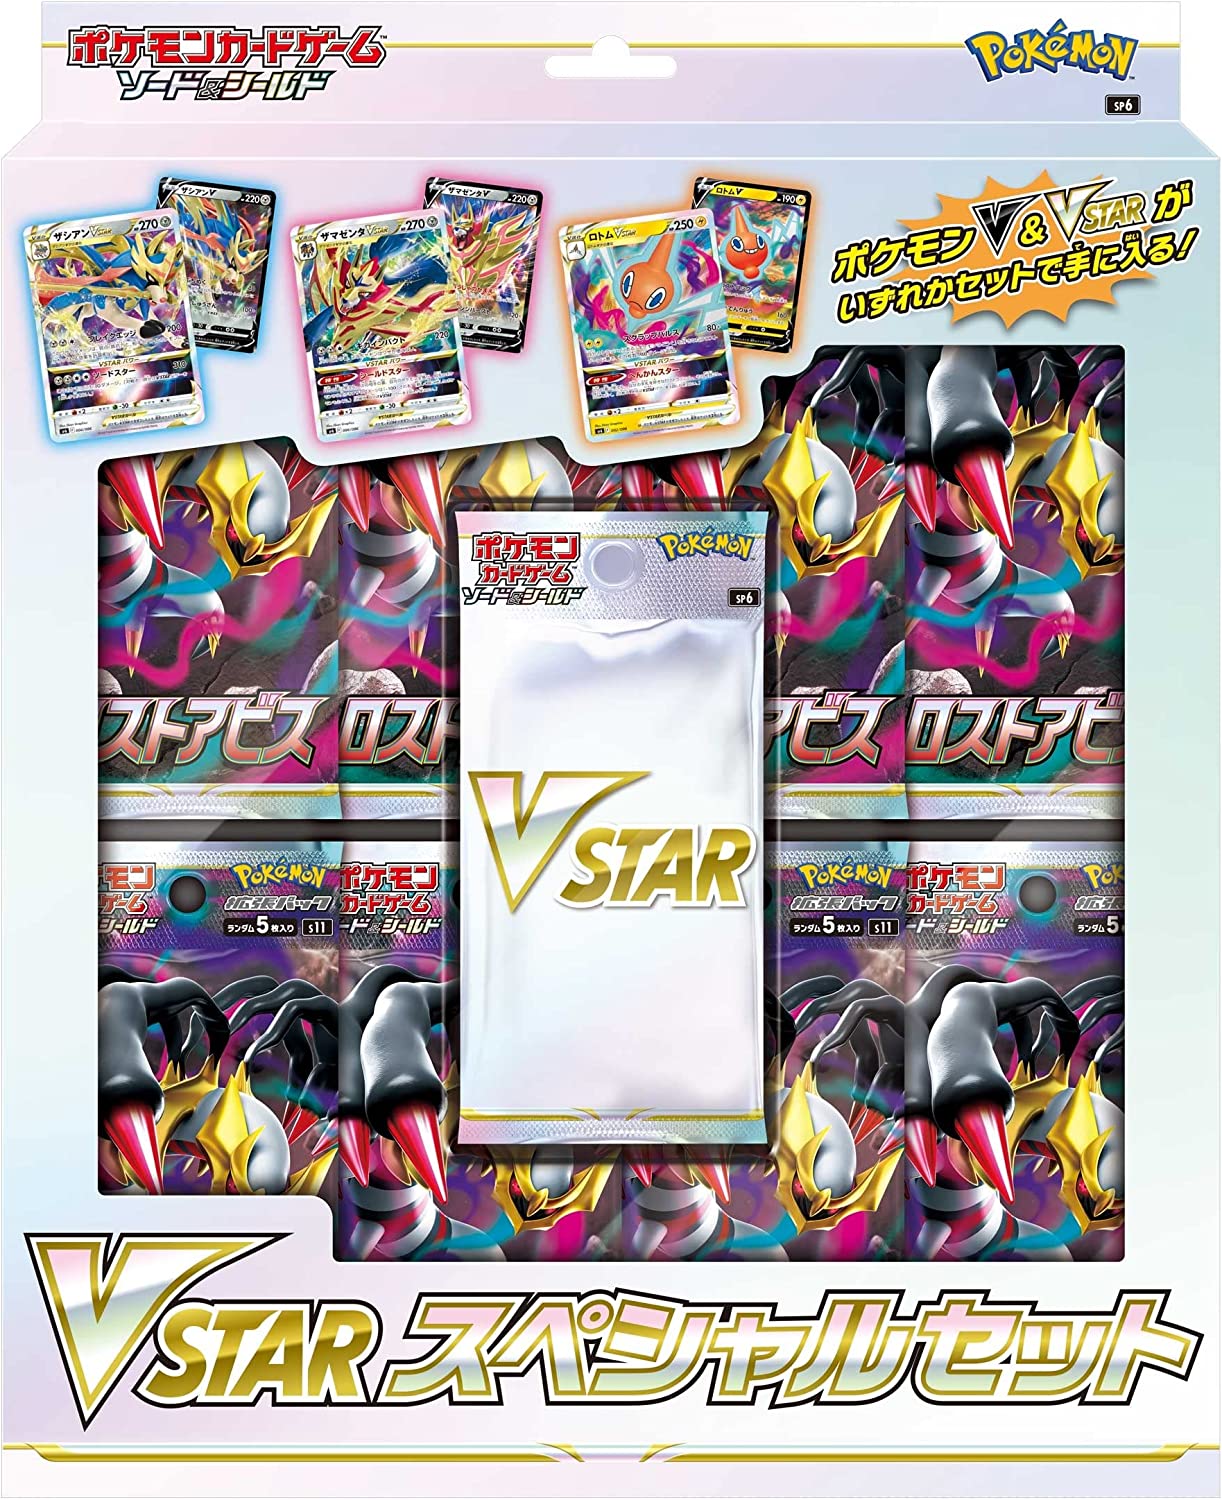 [SP6] POKÉMON CARD GAME Sword & Shield ｢VSTAR SPECIAL SET｣  Release date: August 5 2022      V & VSTAR Promo Card Pack ×1 pack     Expansion pack ｢Lost Abyss｣ ×8 packs     ※ The expansion pack contains 5 cards at random.     VSTAR marker ×1 piece  ※ One of the three card sets is randomly included in the V & VSTAR Promo Card Pack.